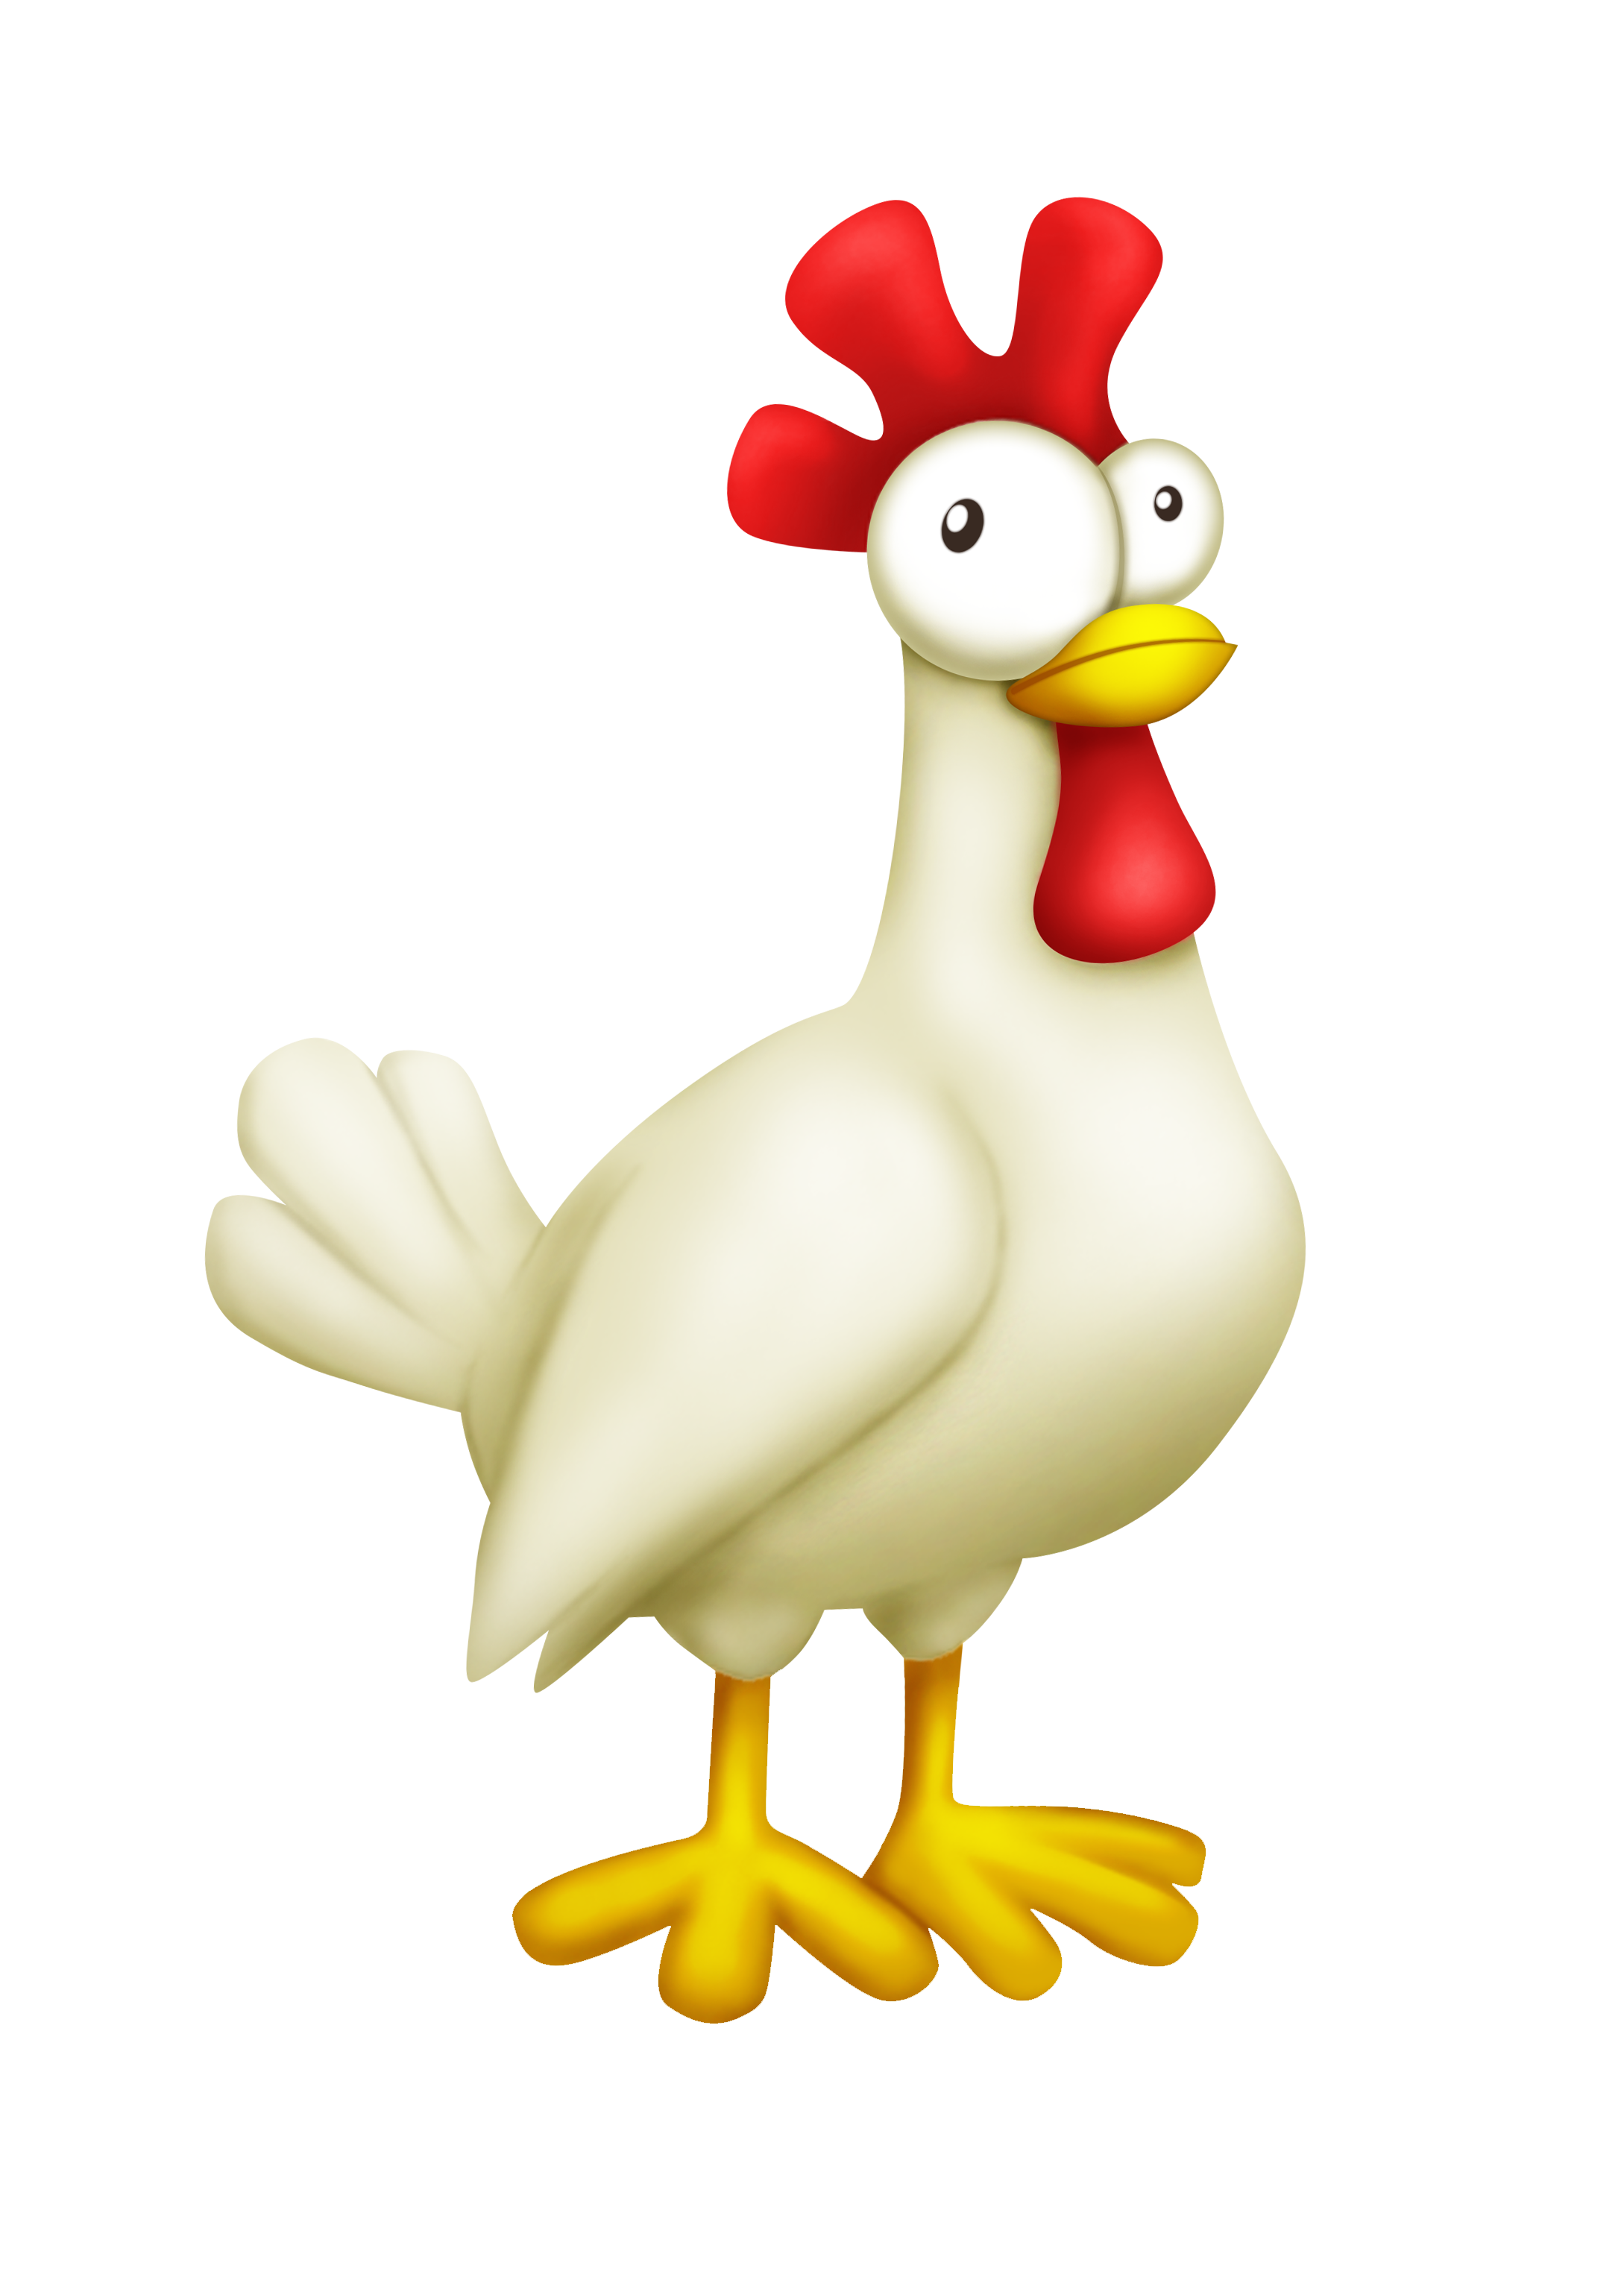 Chicken clip art #40303 - Free Icons and PNG Backgrounds